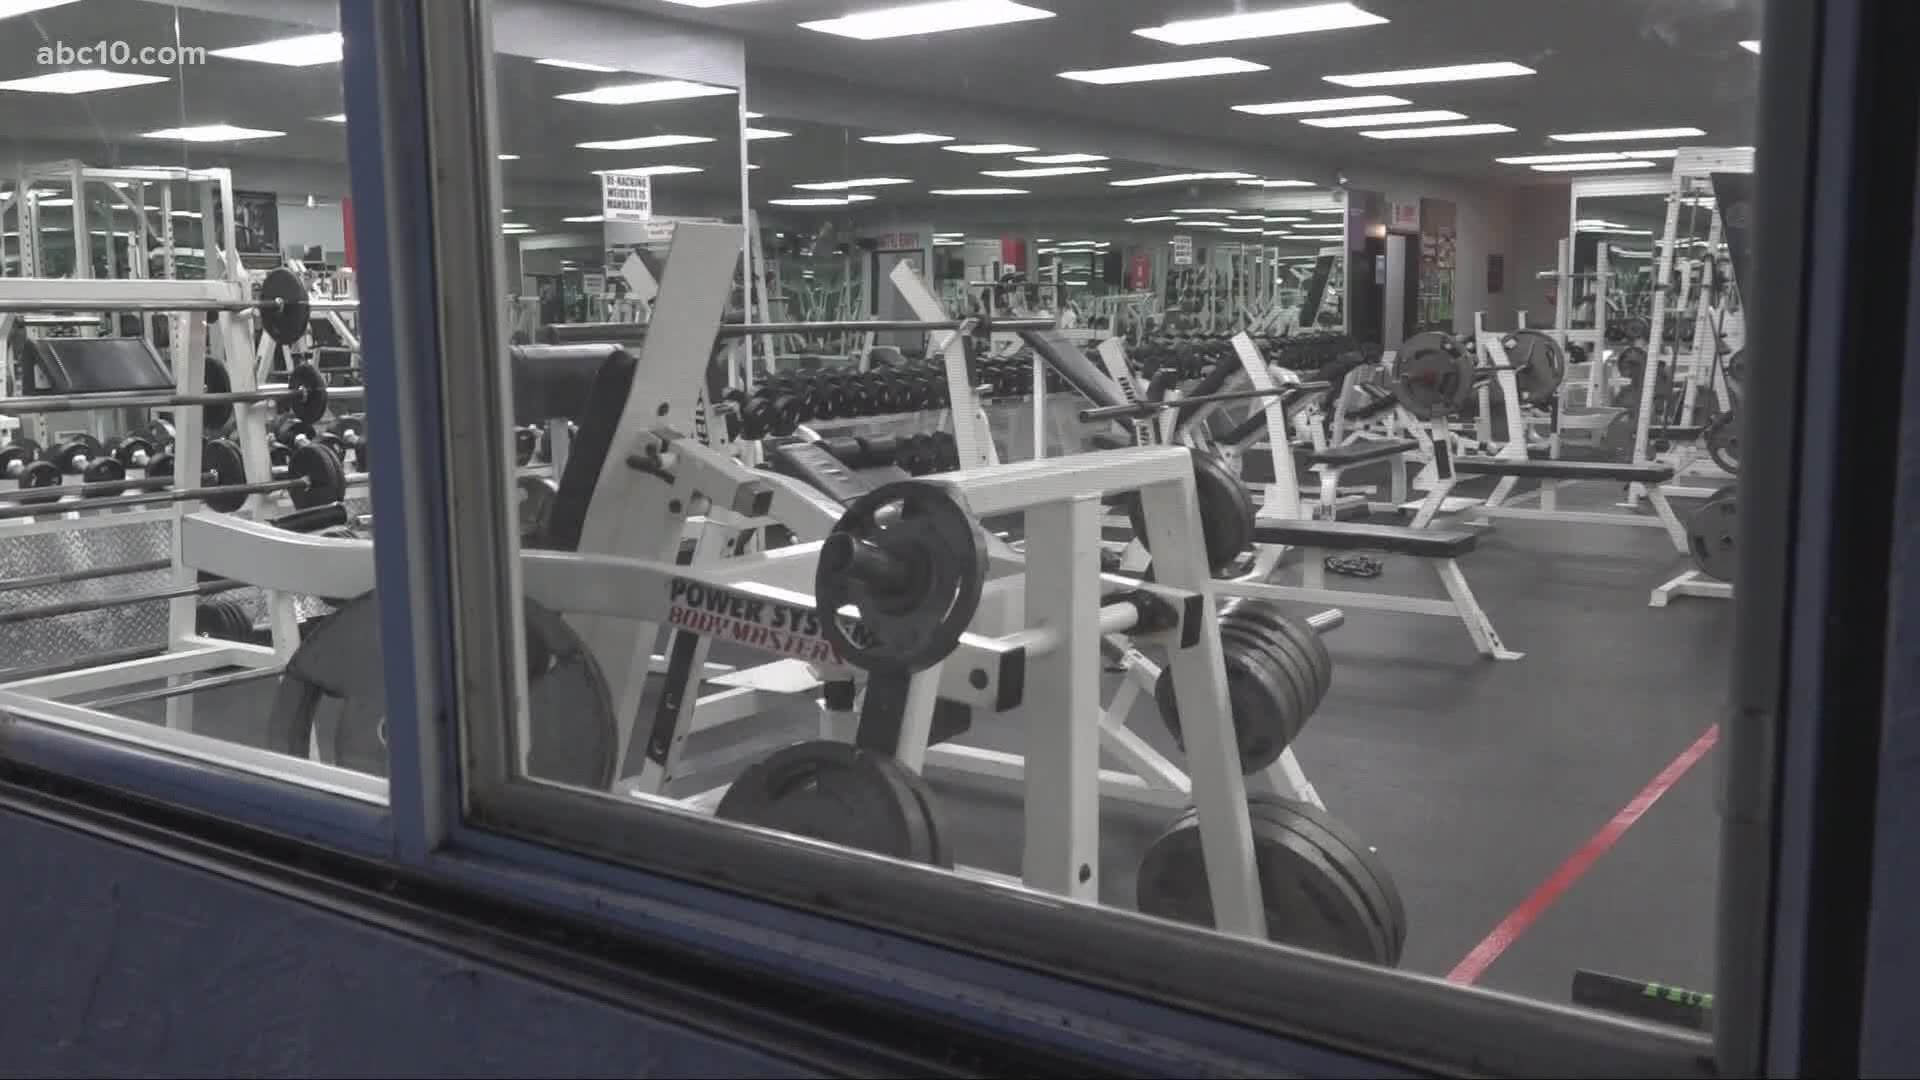 California health officials will release new guidance on Friday that would allow many more businesses to reopen including gyms, bars, sports, and schools.